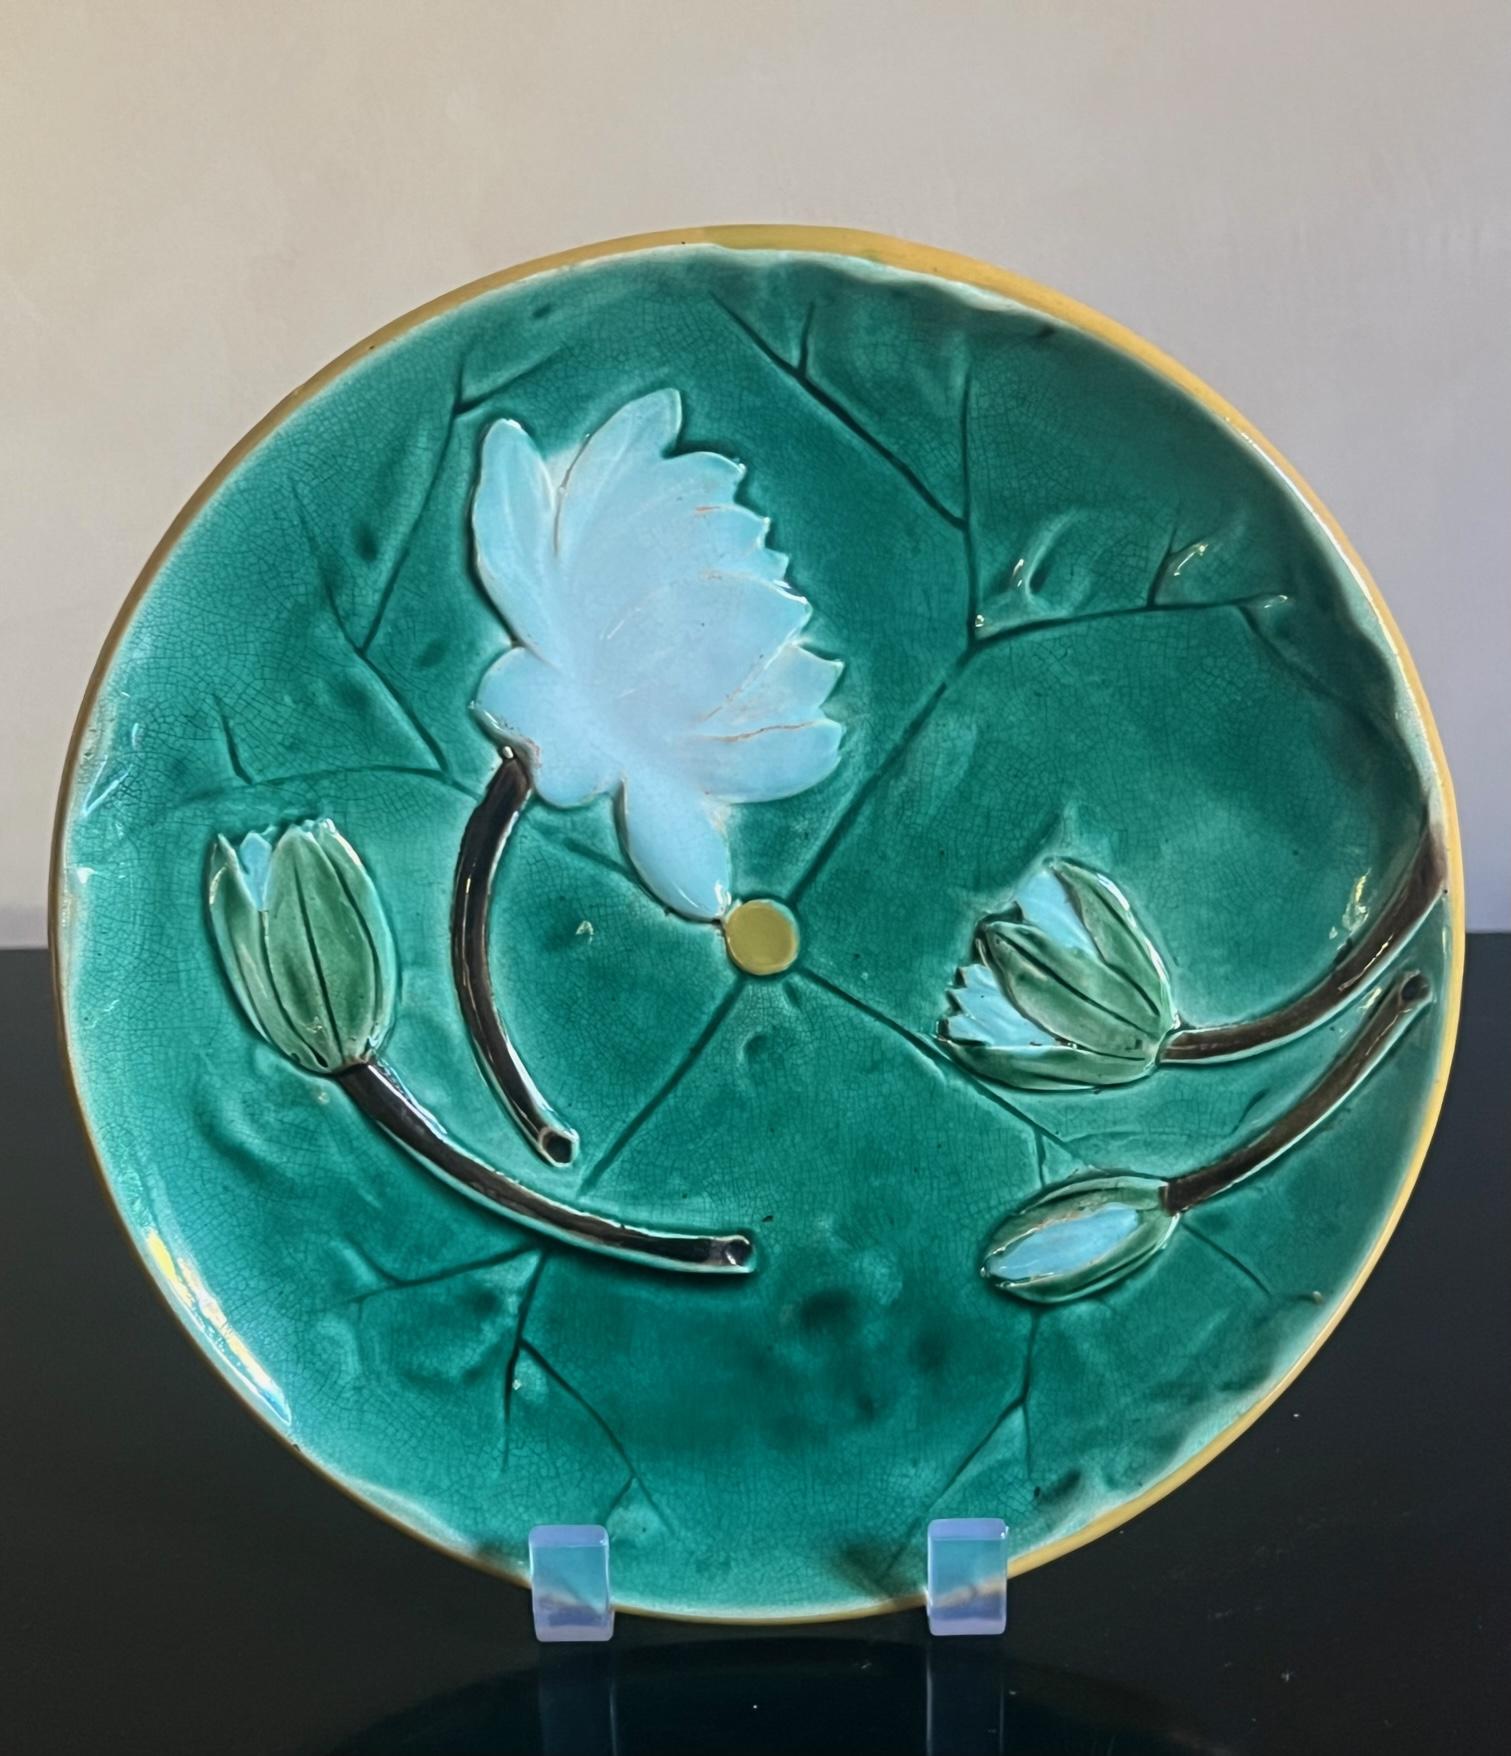 Joseph Holdcraft Majolica Pond Lily Plate, C. 1885 For Sale 3